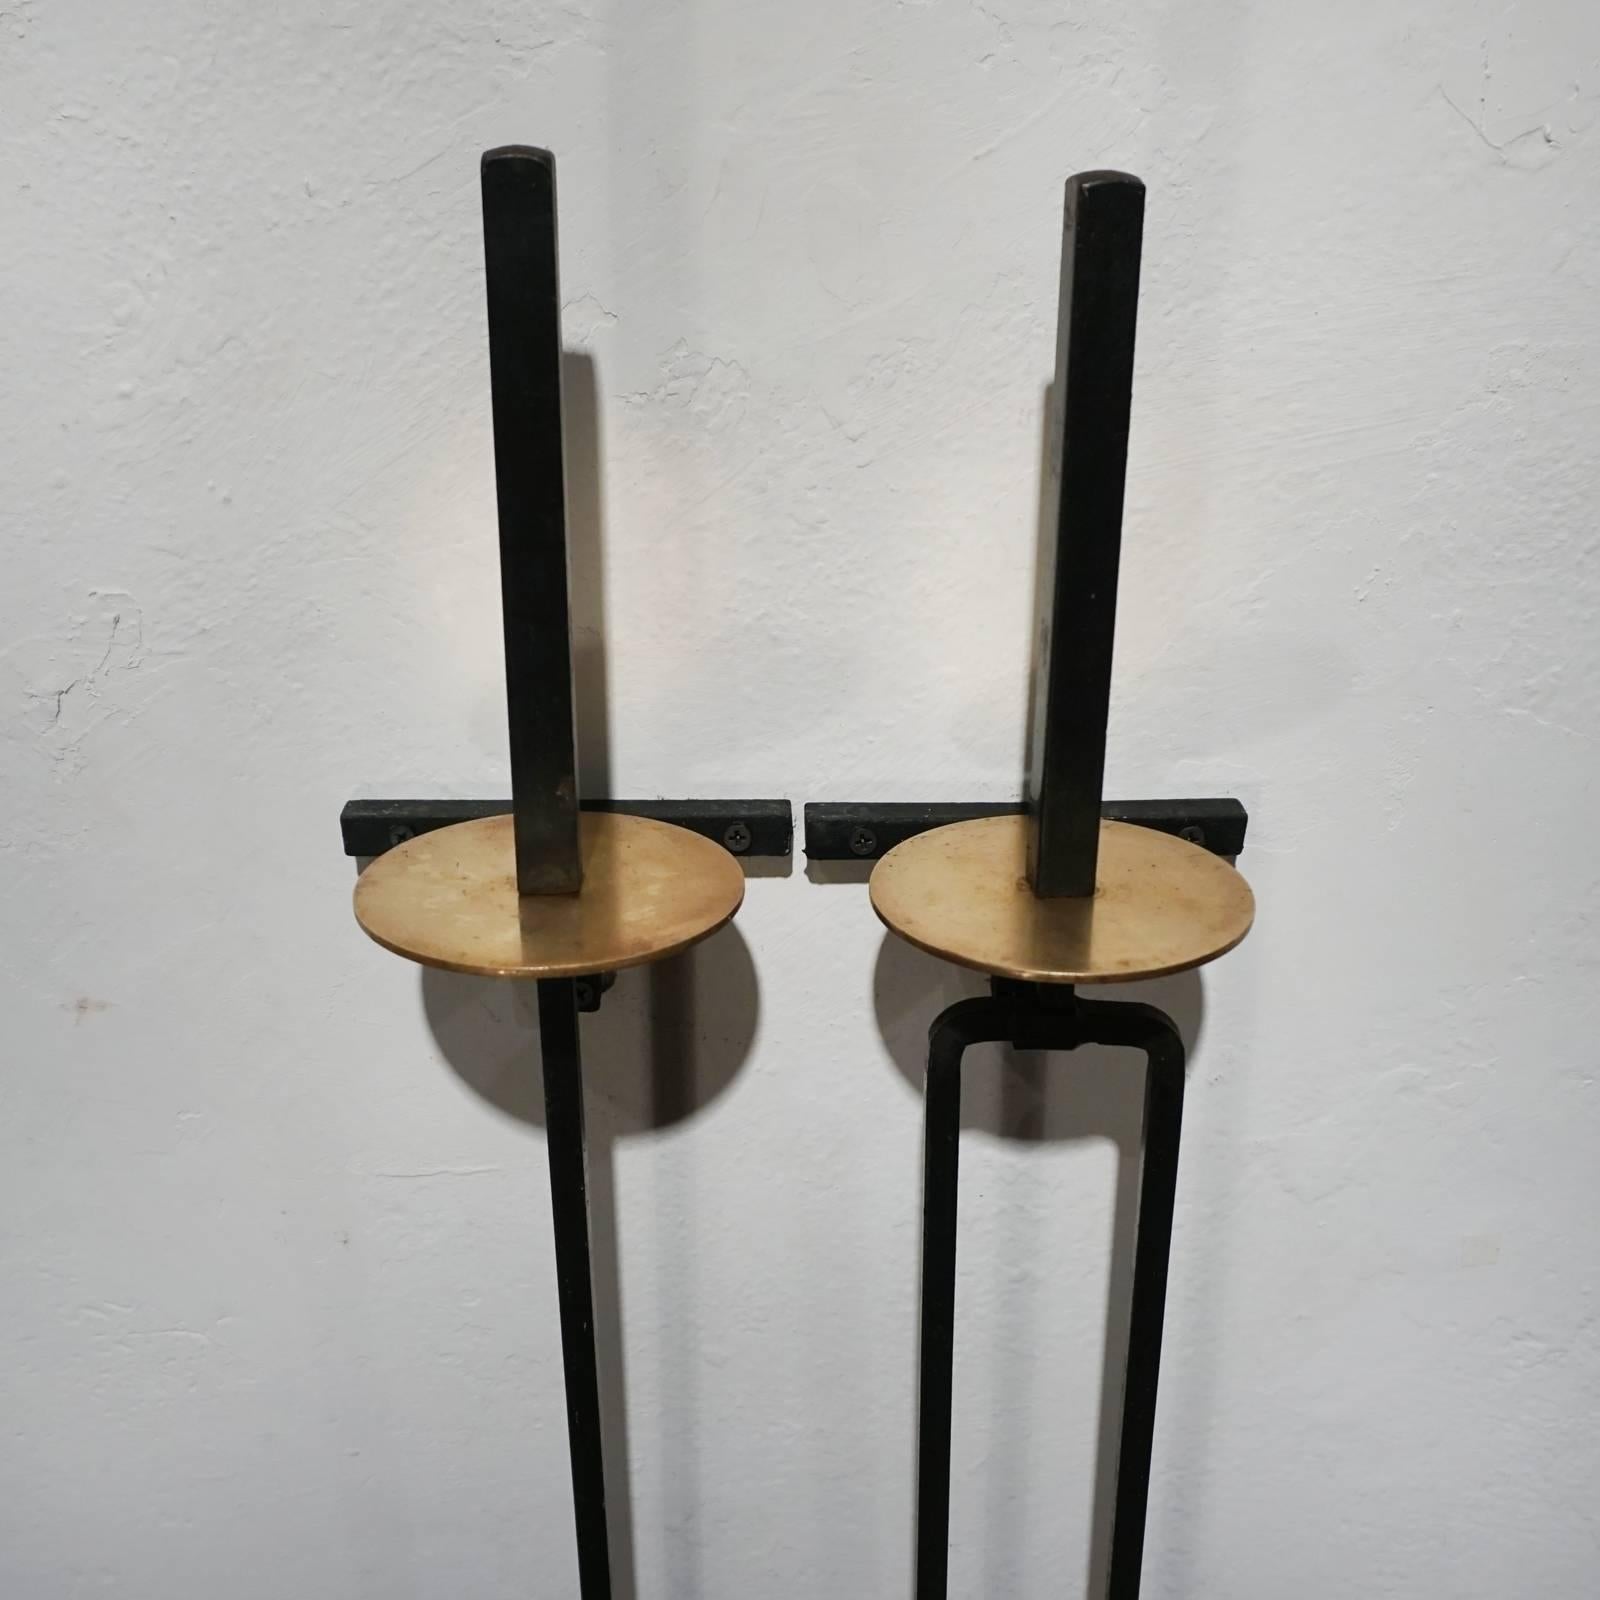 Wall-mounted fire tools by Mel Bogart for Los Angeles-based company Stewart-Winthrop. Selected for the Museum of Modern Art's 